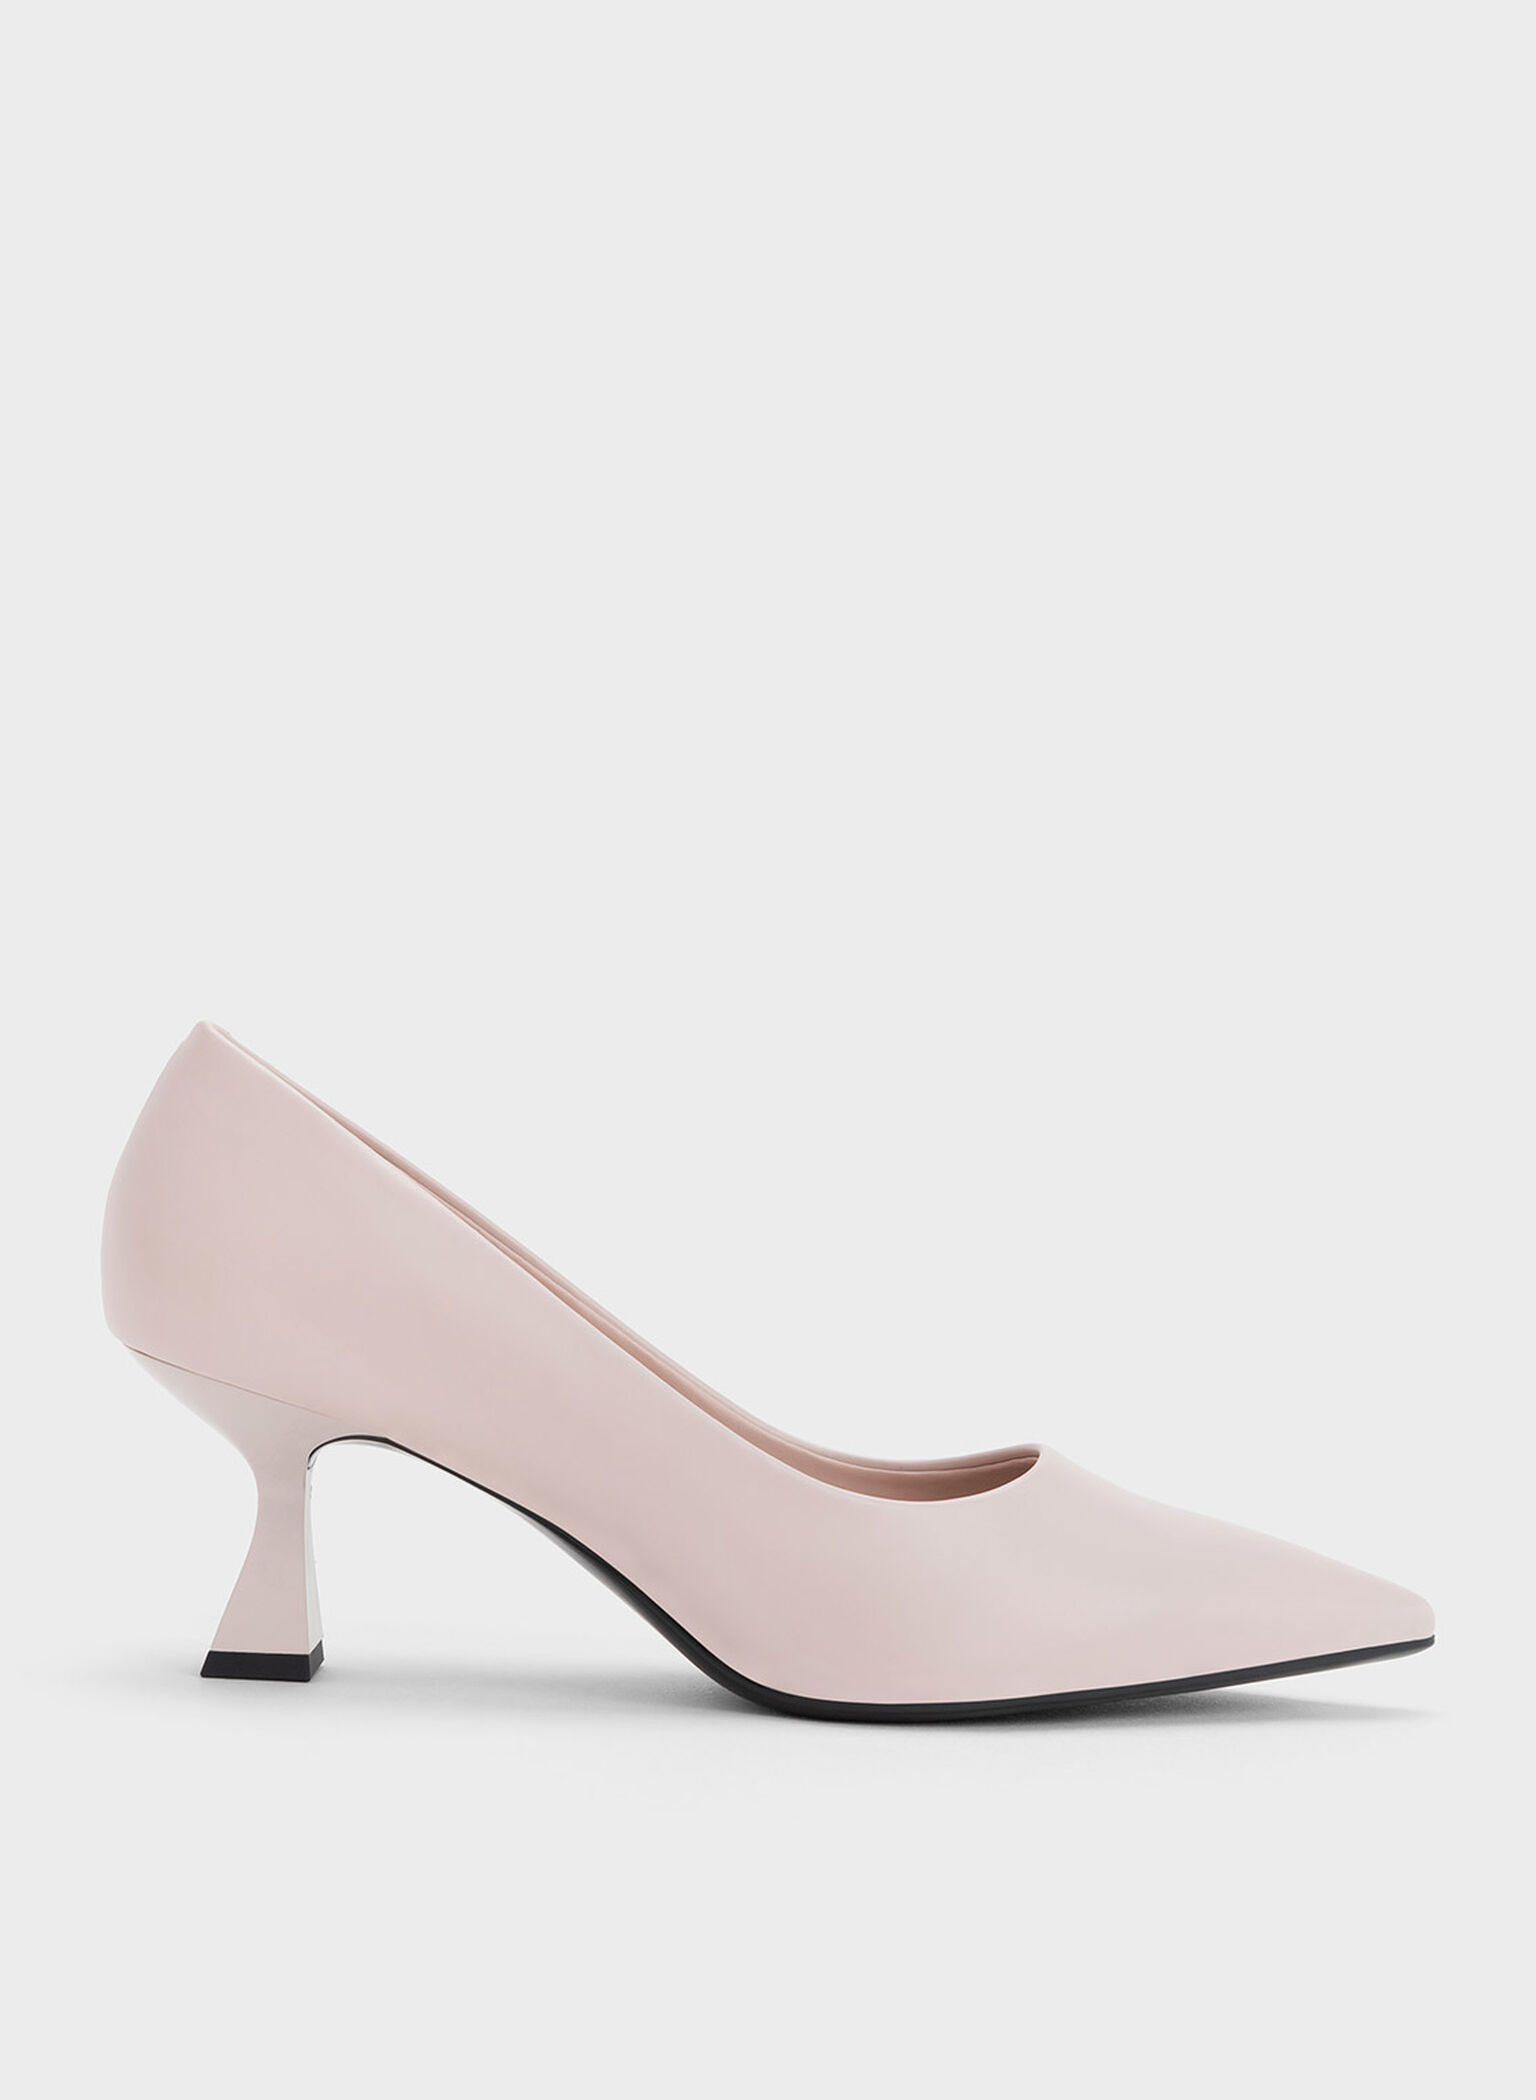 Nude Pointed-Toe Flare Heel Pumps - CHARLES & KEITH US